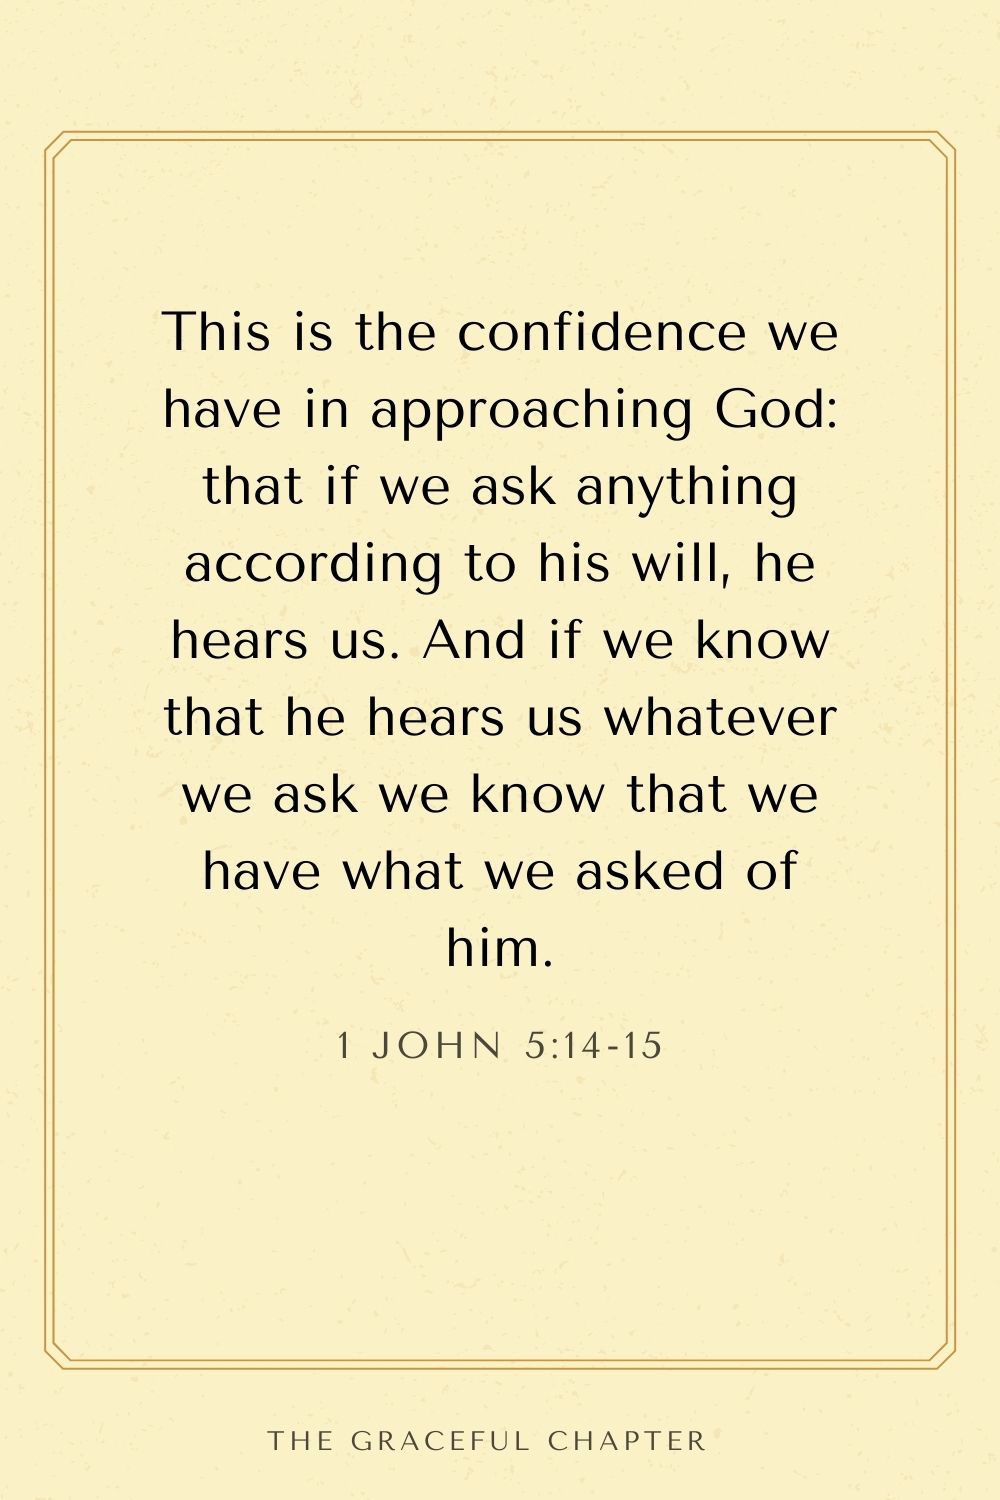 This is the confidence we have in approaching God: that if we ask anything according to his will, he hears us. And if we know that he hears us whatever we ask we know that we have what we asked of him. 1 John 5:14-15